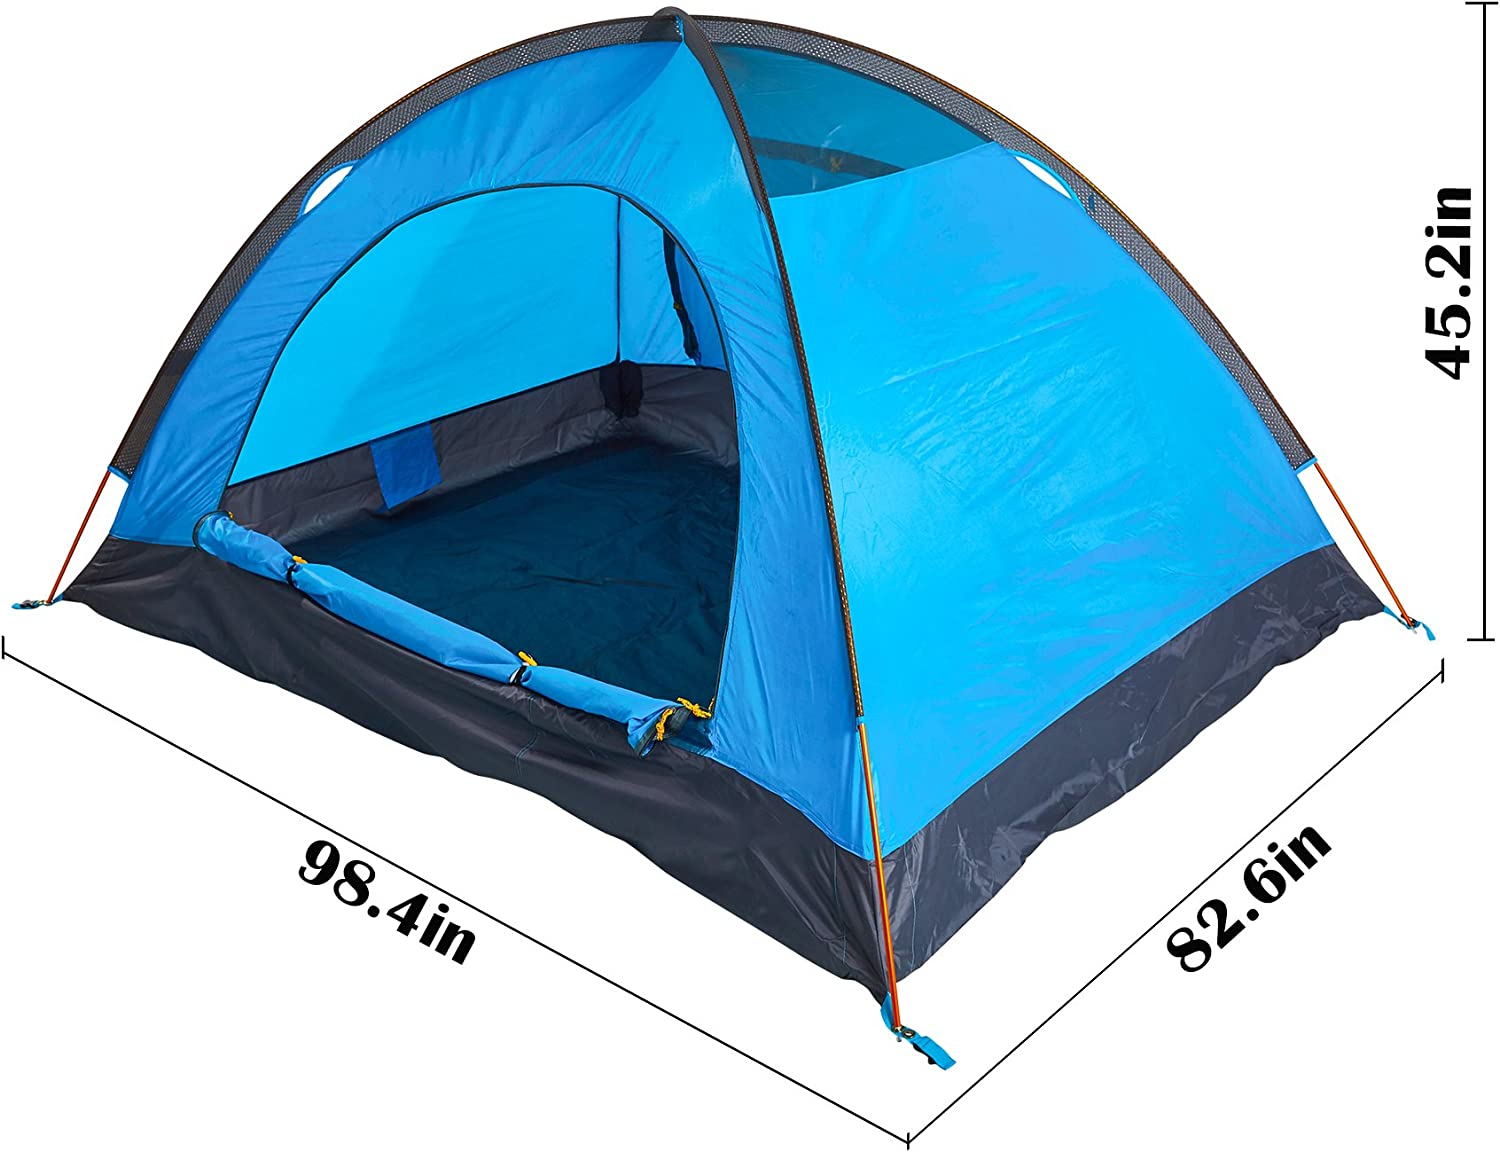 (Out of Stock) 2 Person Backpacking Tent, Lightweight for Camping Hiking with Carry Bag